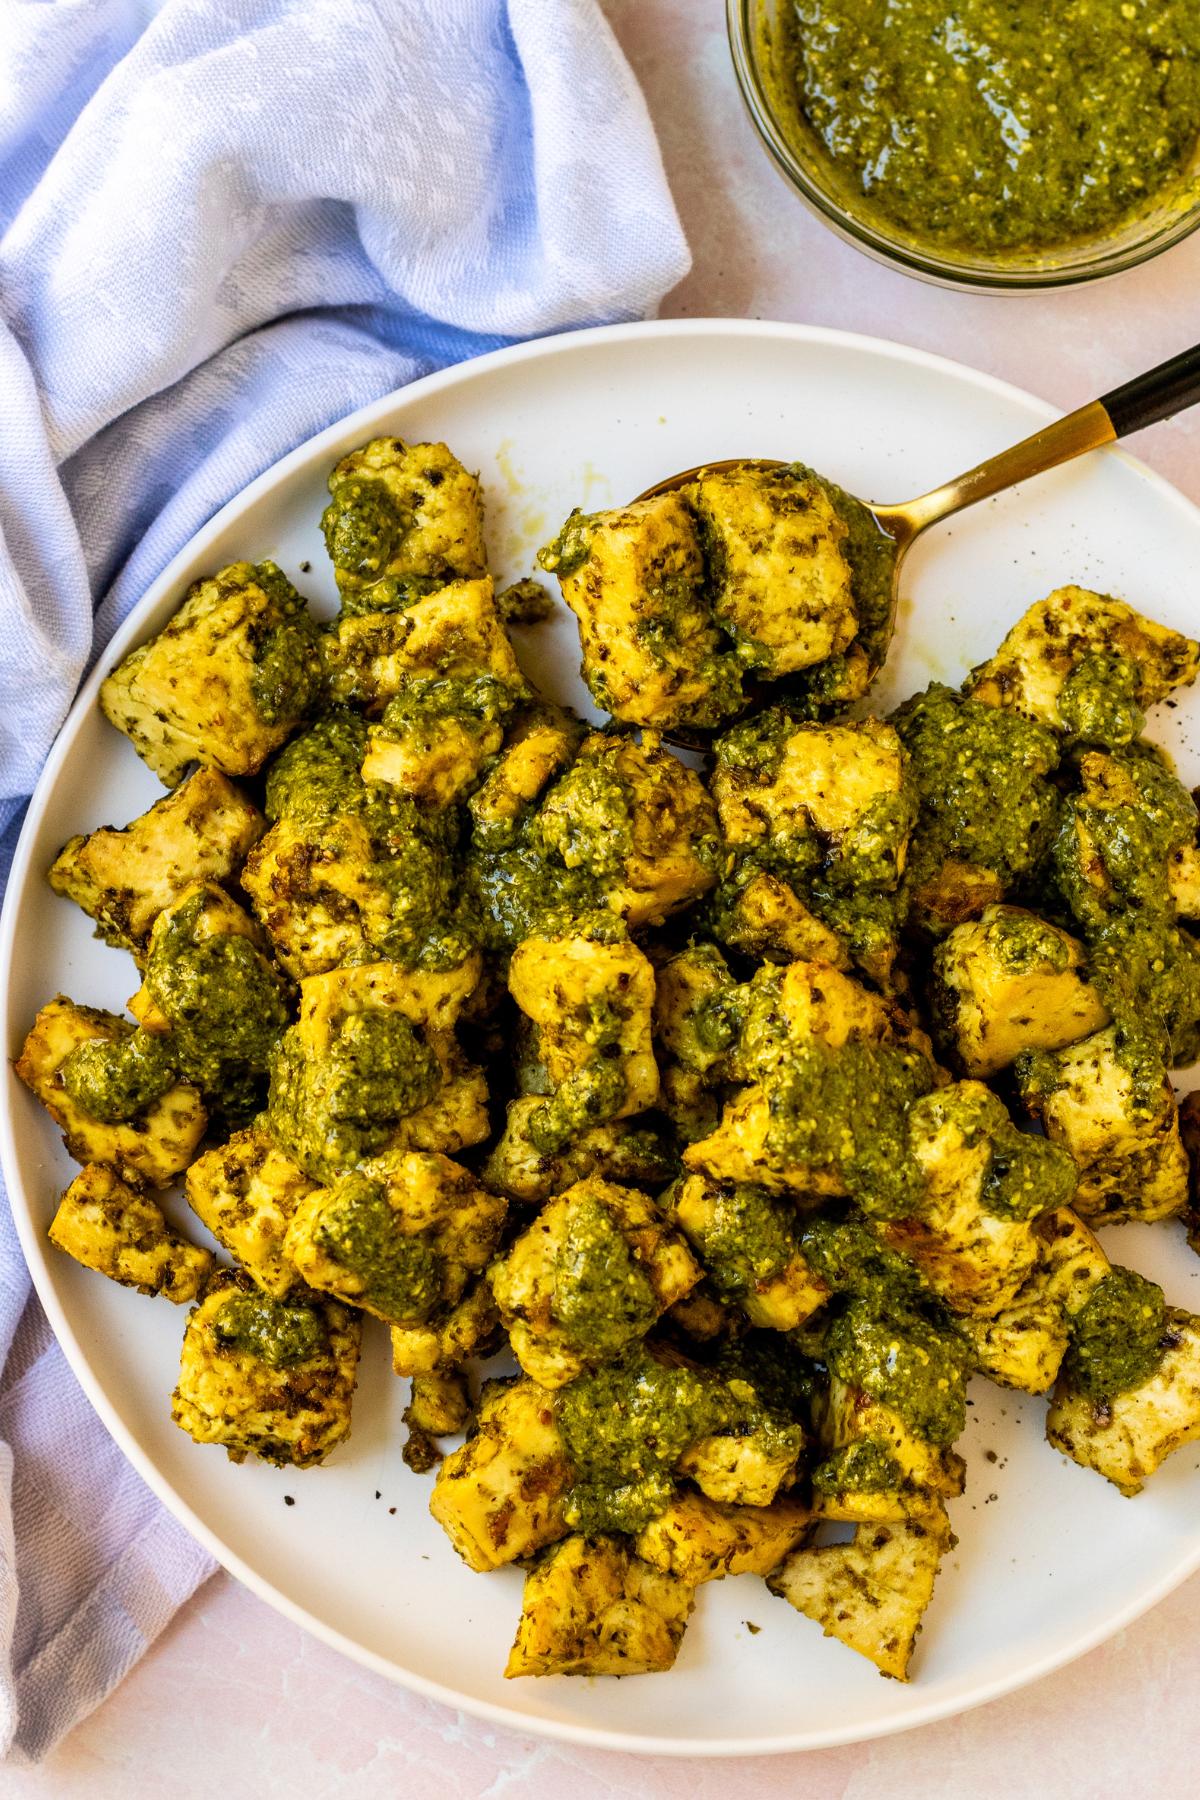 Plate of baked tofu drizzled with extra pesto sauce.